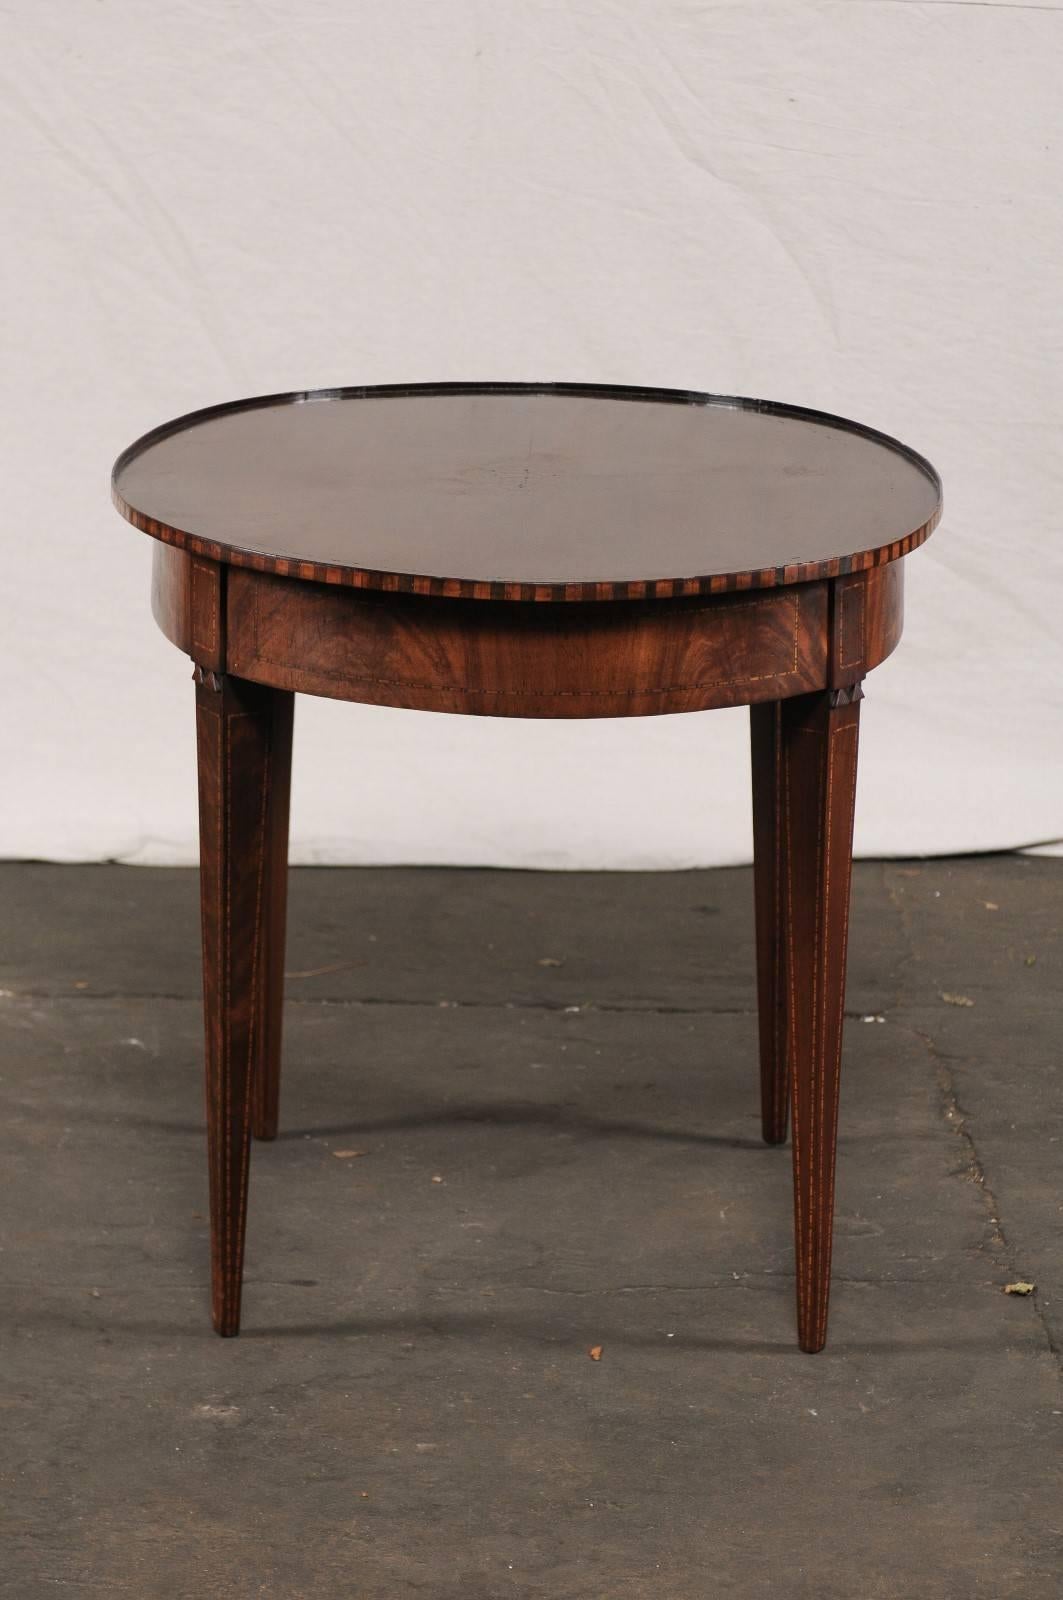 19th Century Neoclassical Inlaid Mahogany Oval Table 2